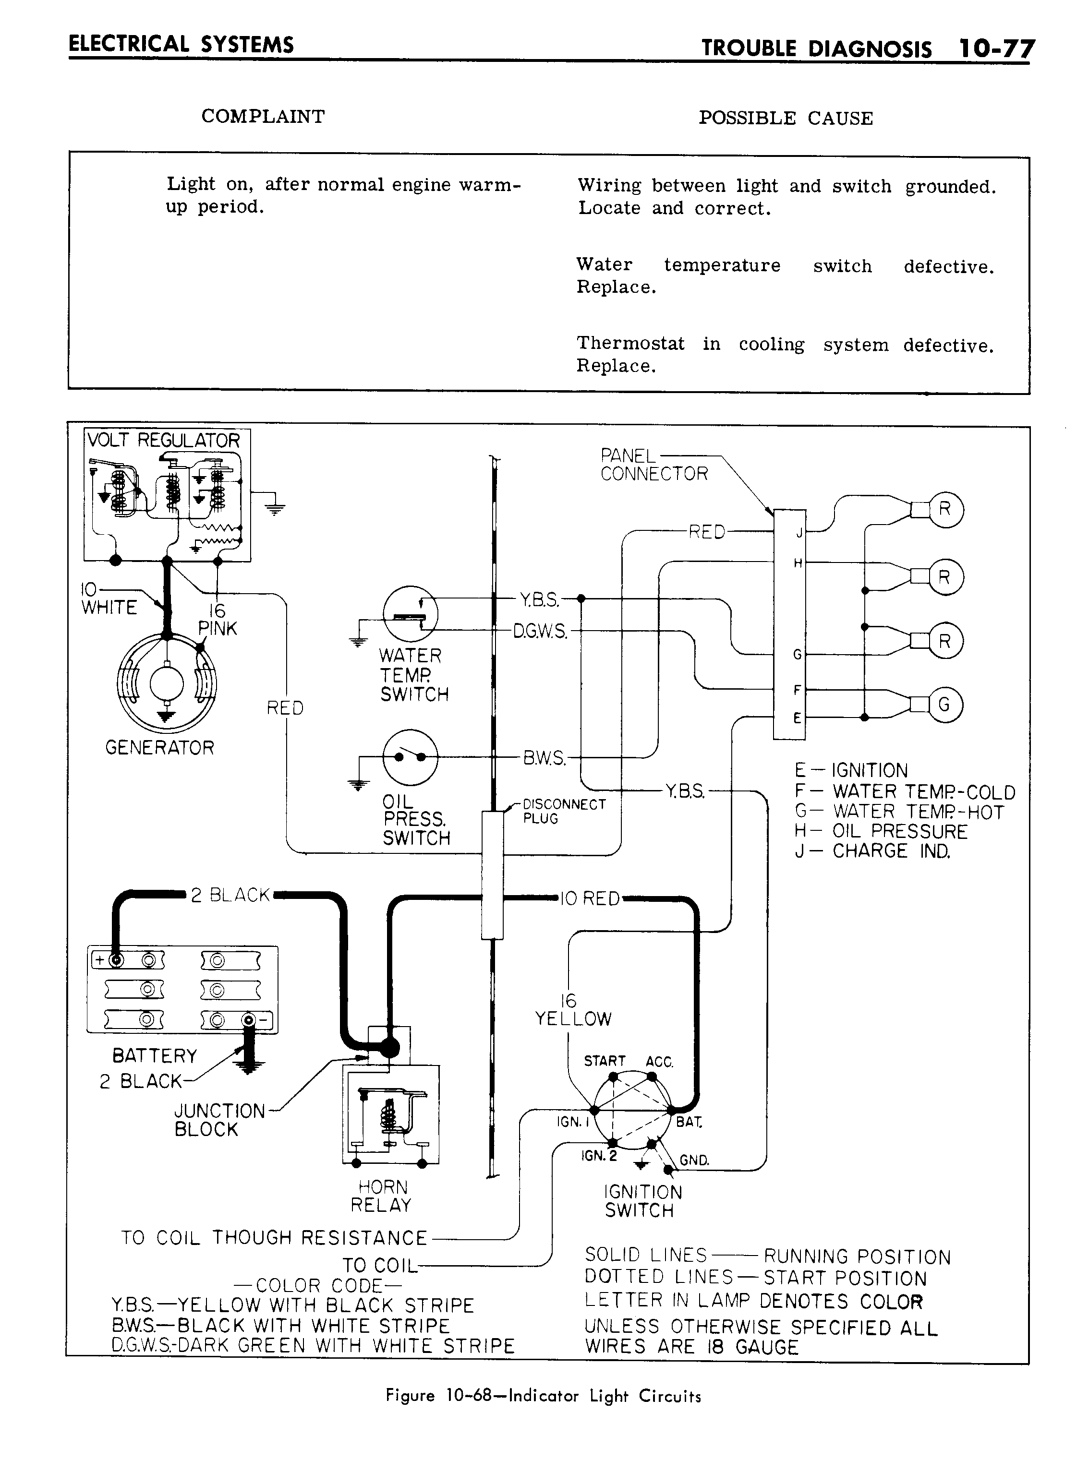 n_10 1961 Buick Shop Manual - Electrical Systems-077-077.jpg